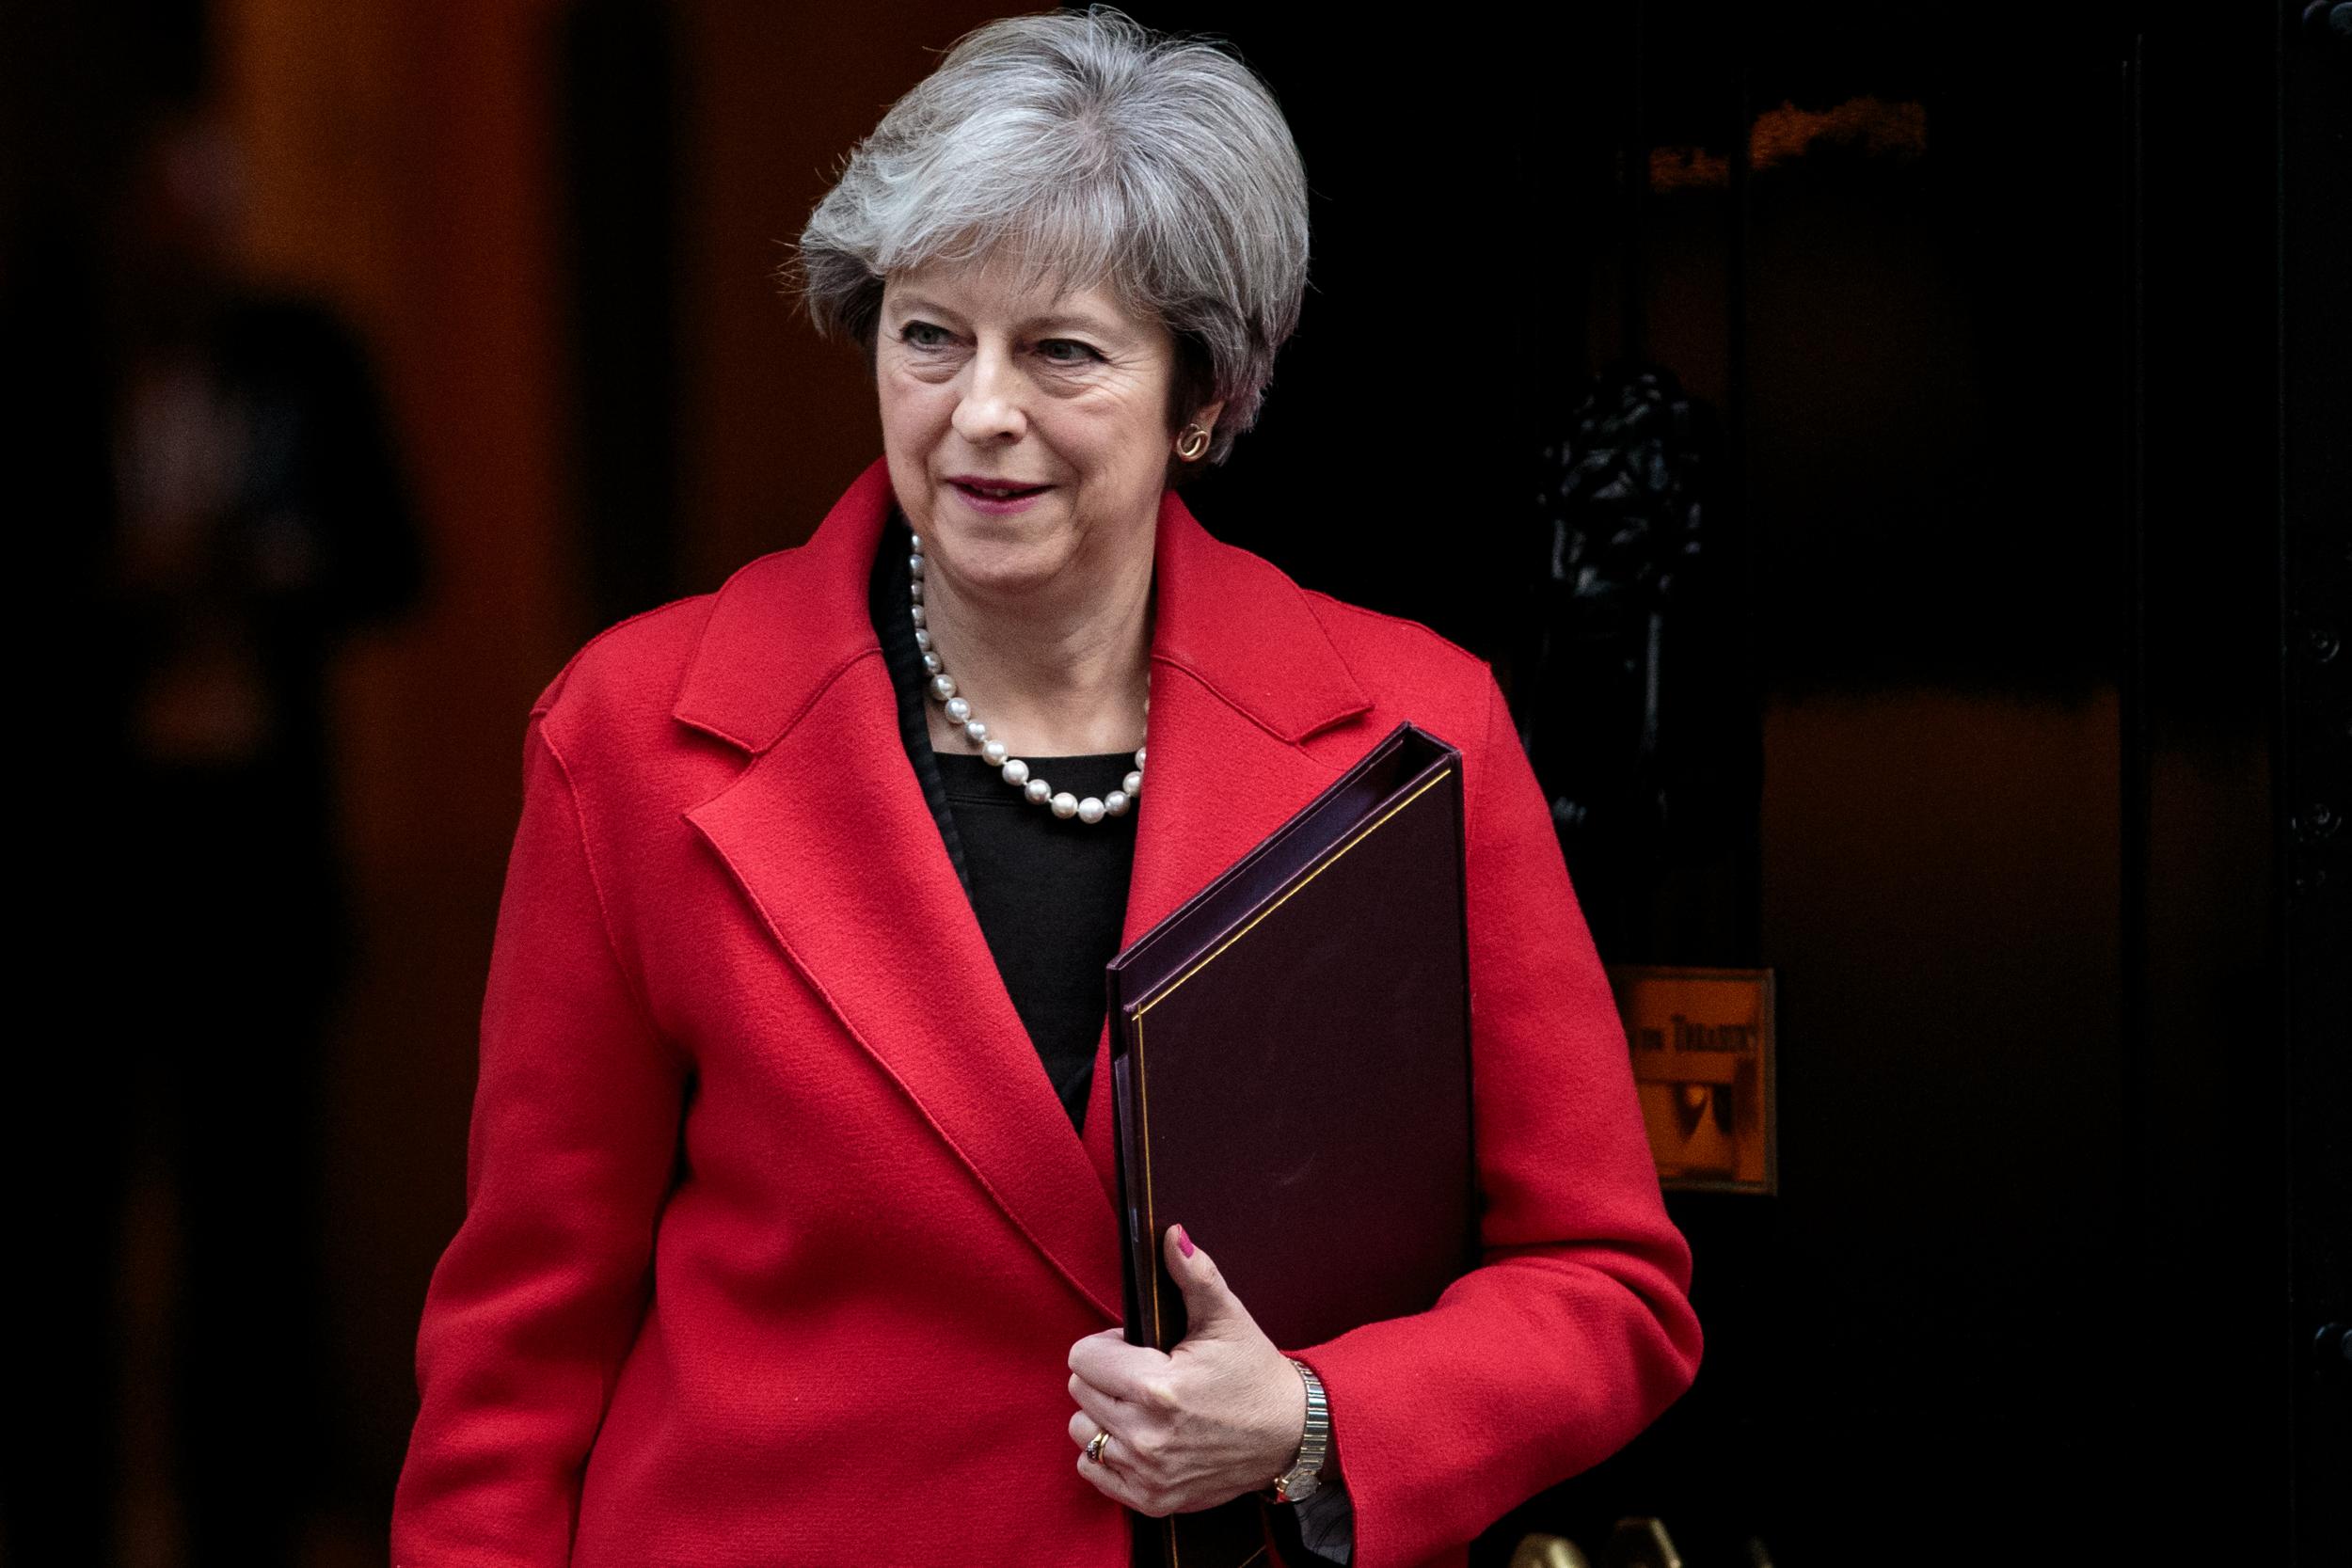 Brexit: Theresa May under growing pressure to scrap exact departure date despite only proposing one days ago